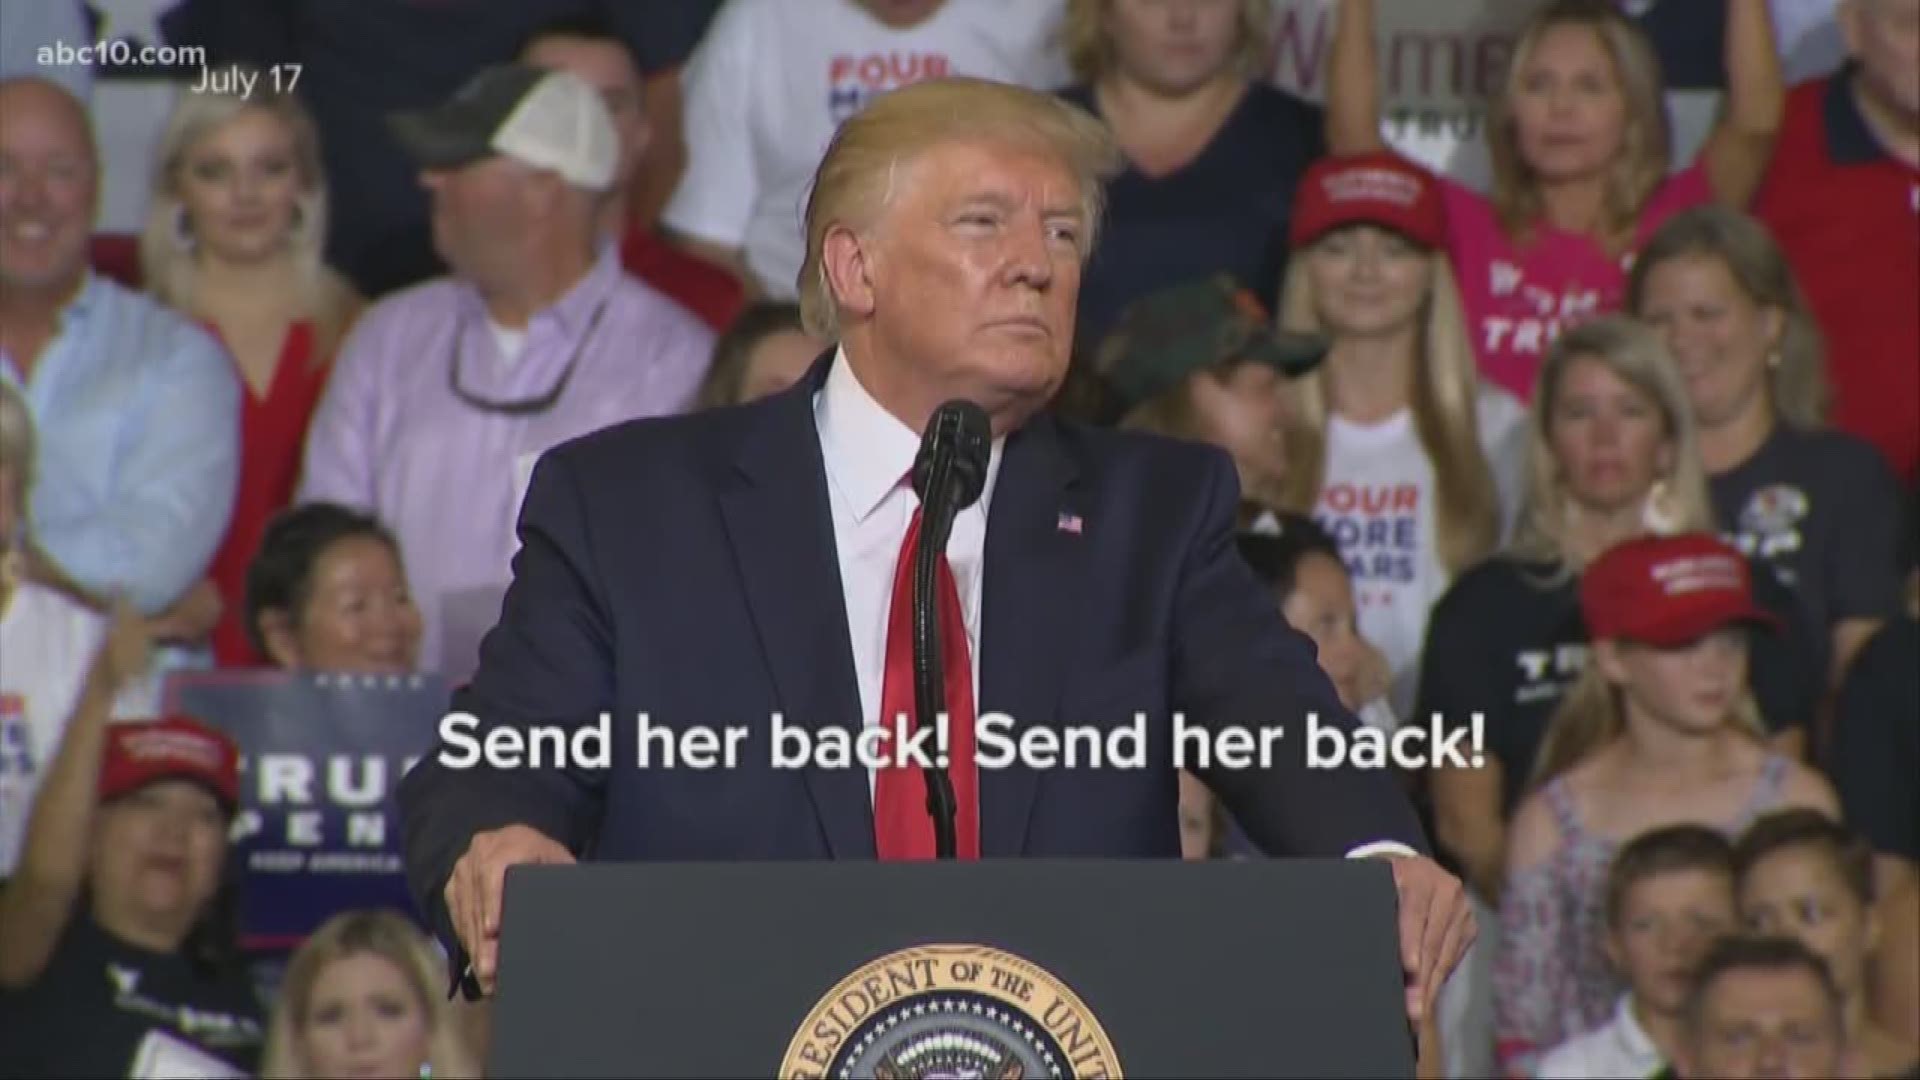 Earlier this week, President Donald Trump sent a series of tweets suggesting that four Democratic congresswomen of color "go back to the places from which they came." Trumps supporters turned that tweet into a chant at a North Carolina rally Wednesday.